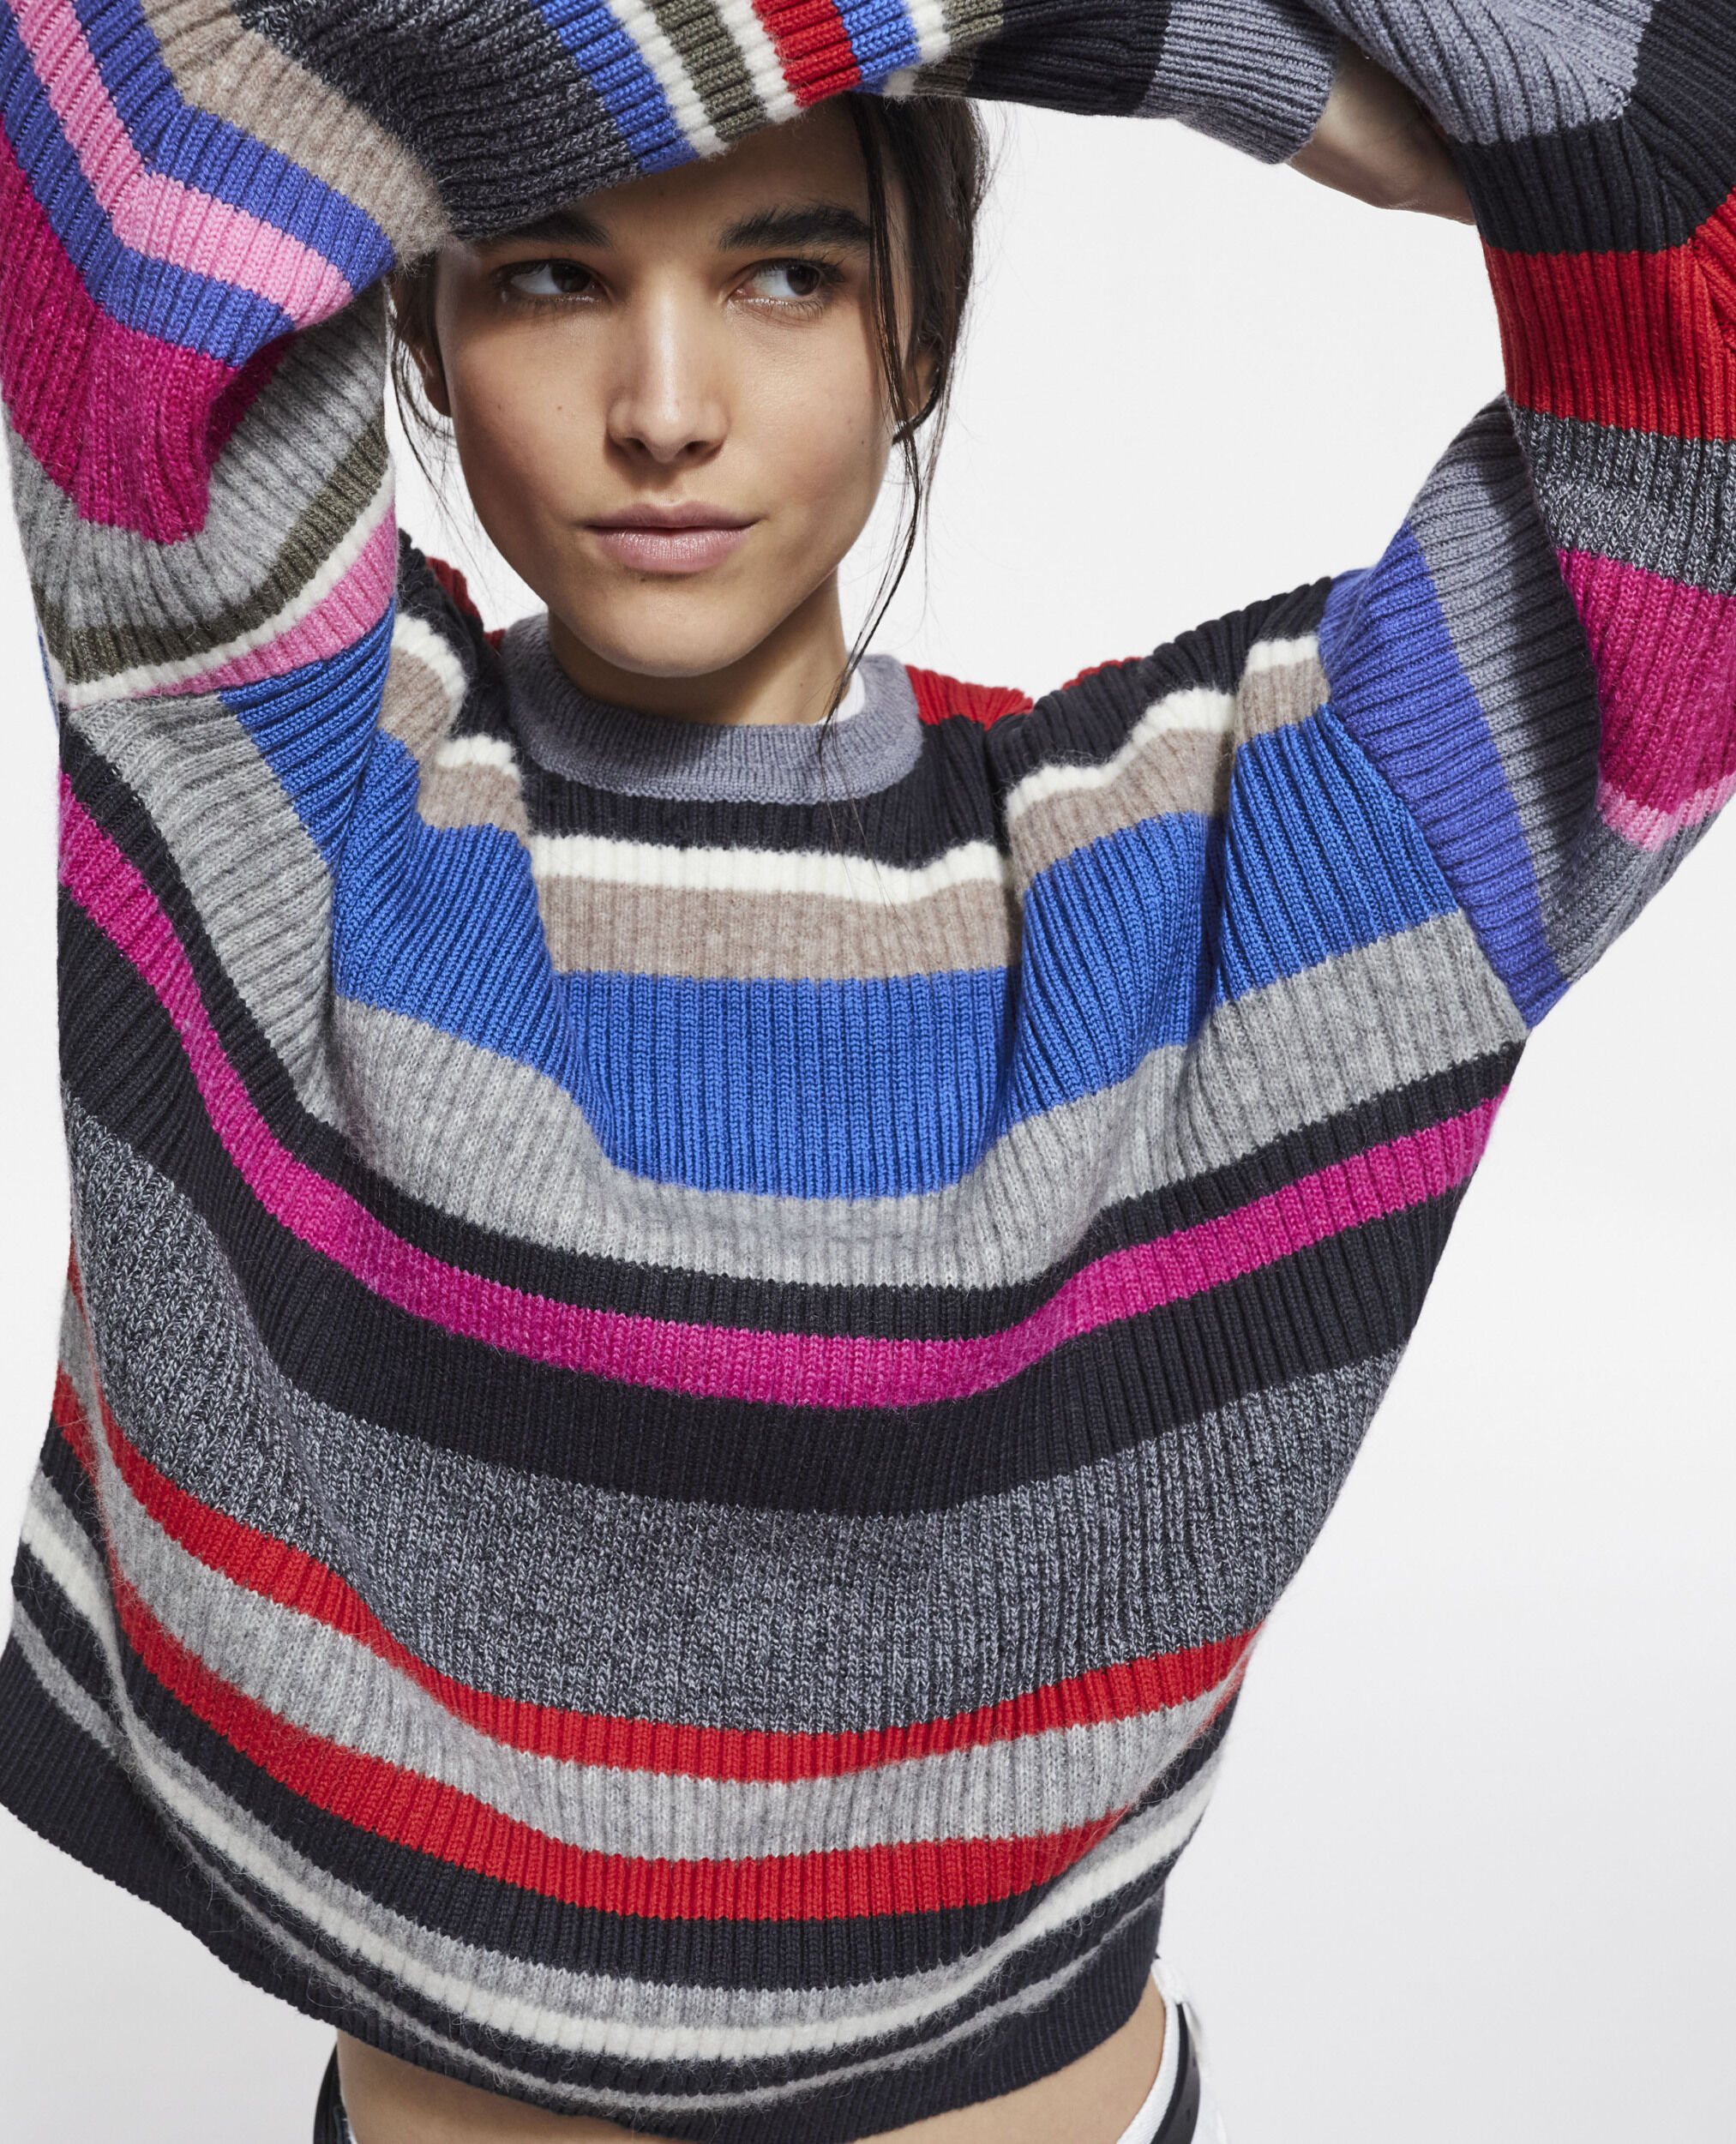 Multicolor sweater, MULTICO, hi-res image number null